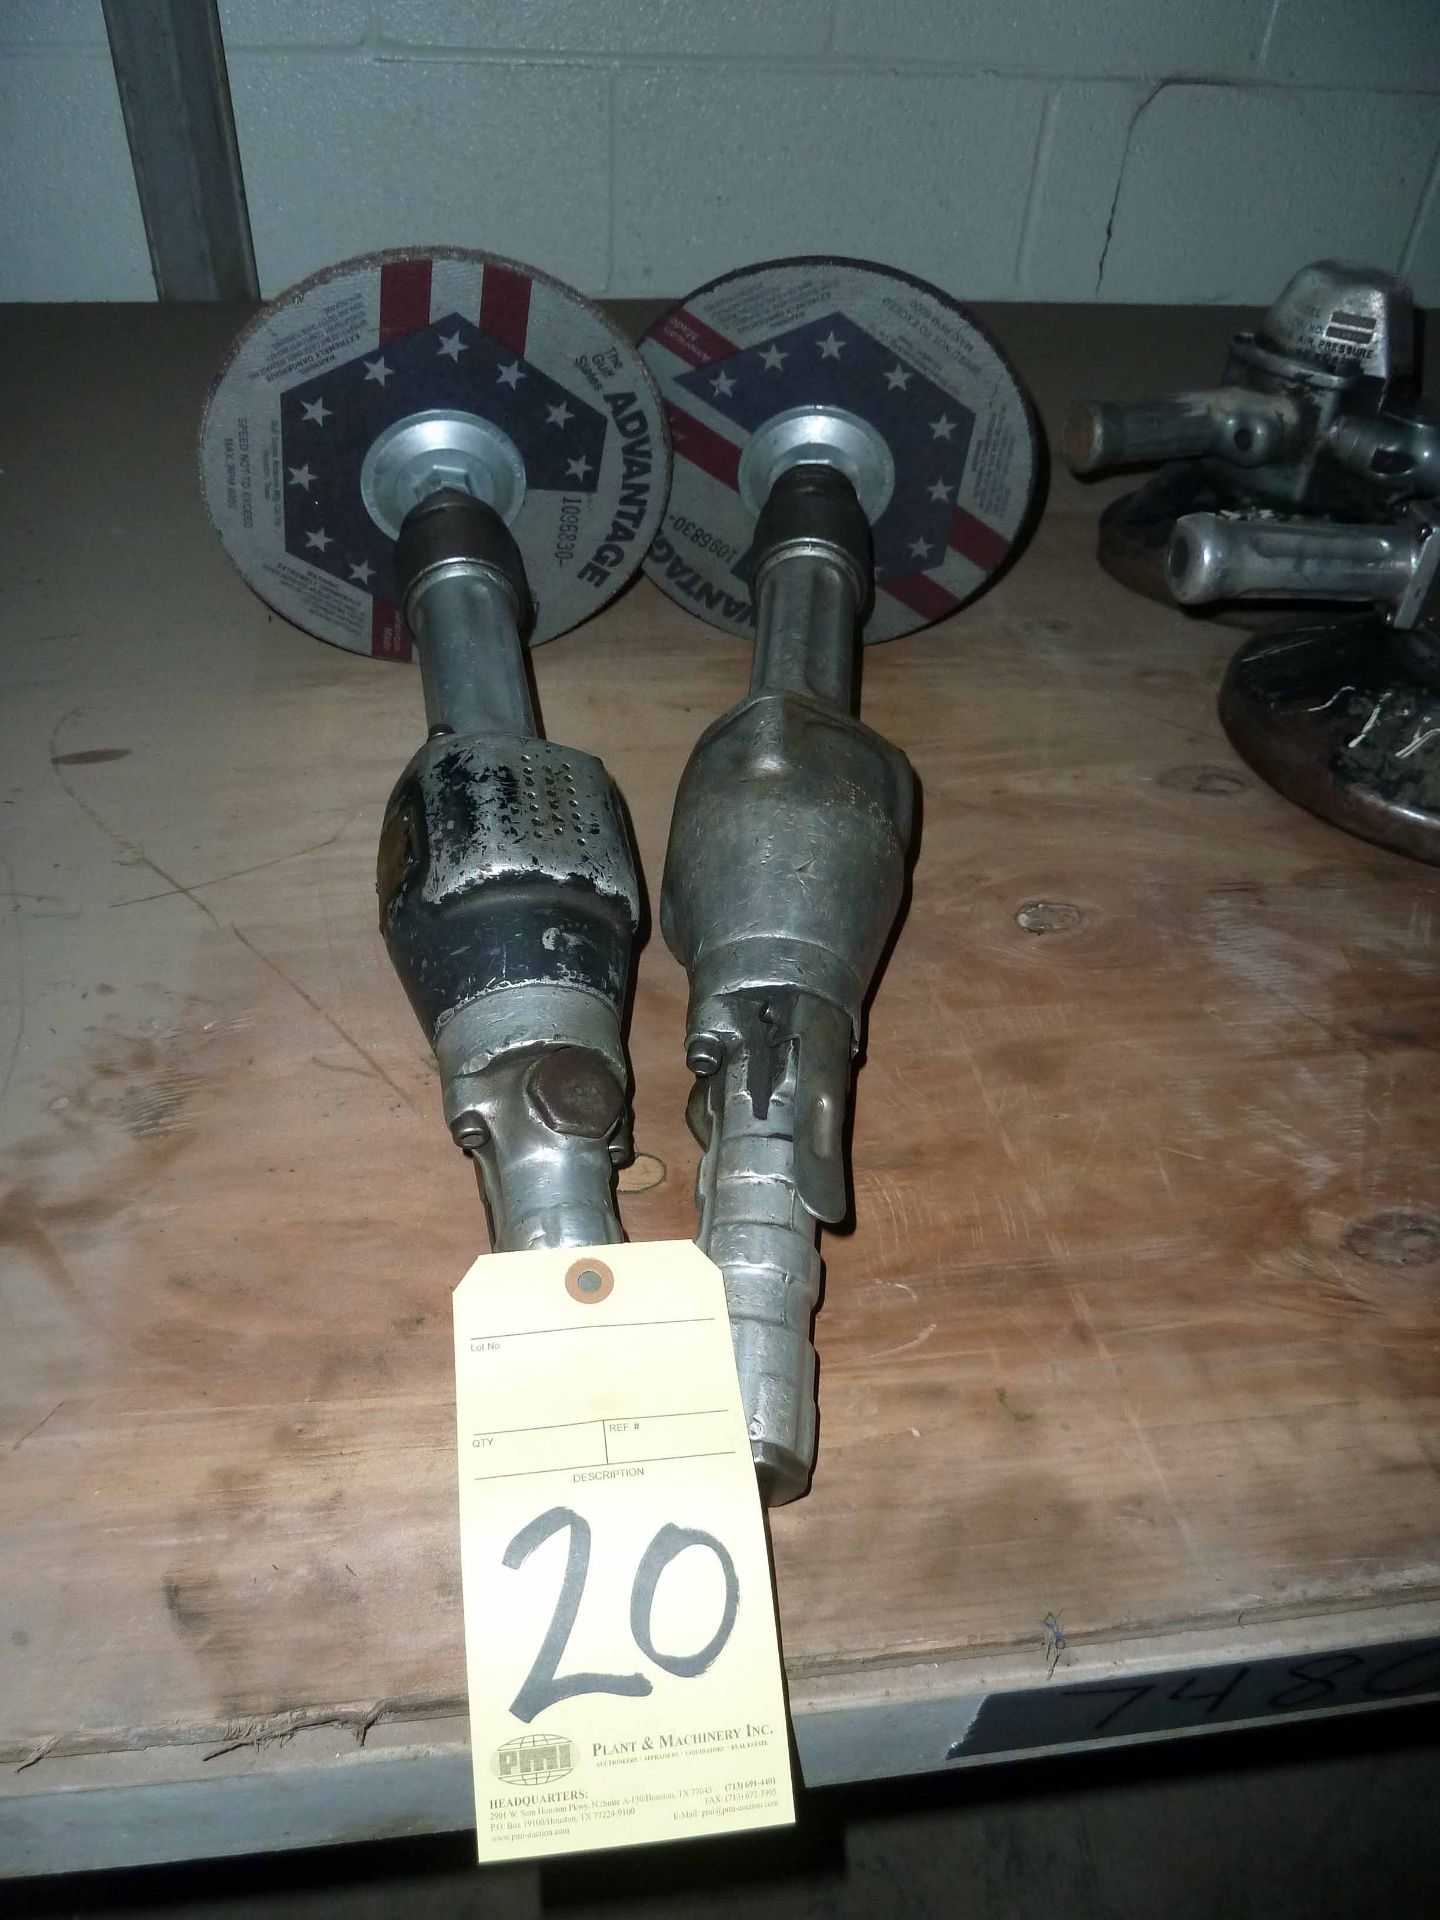 LOT OF EXTENDED PNEUMATIC GRINDERS (2), 7"